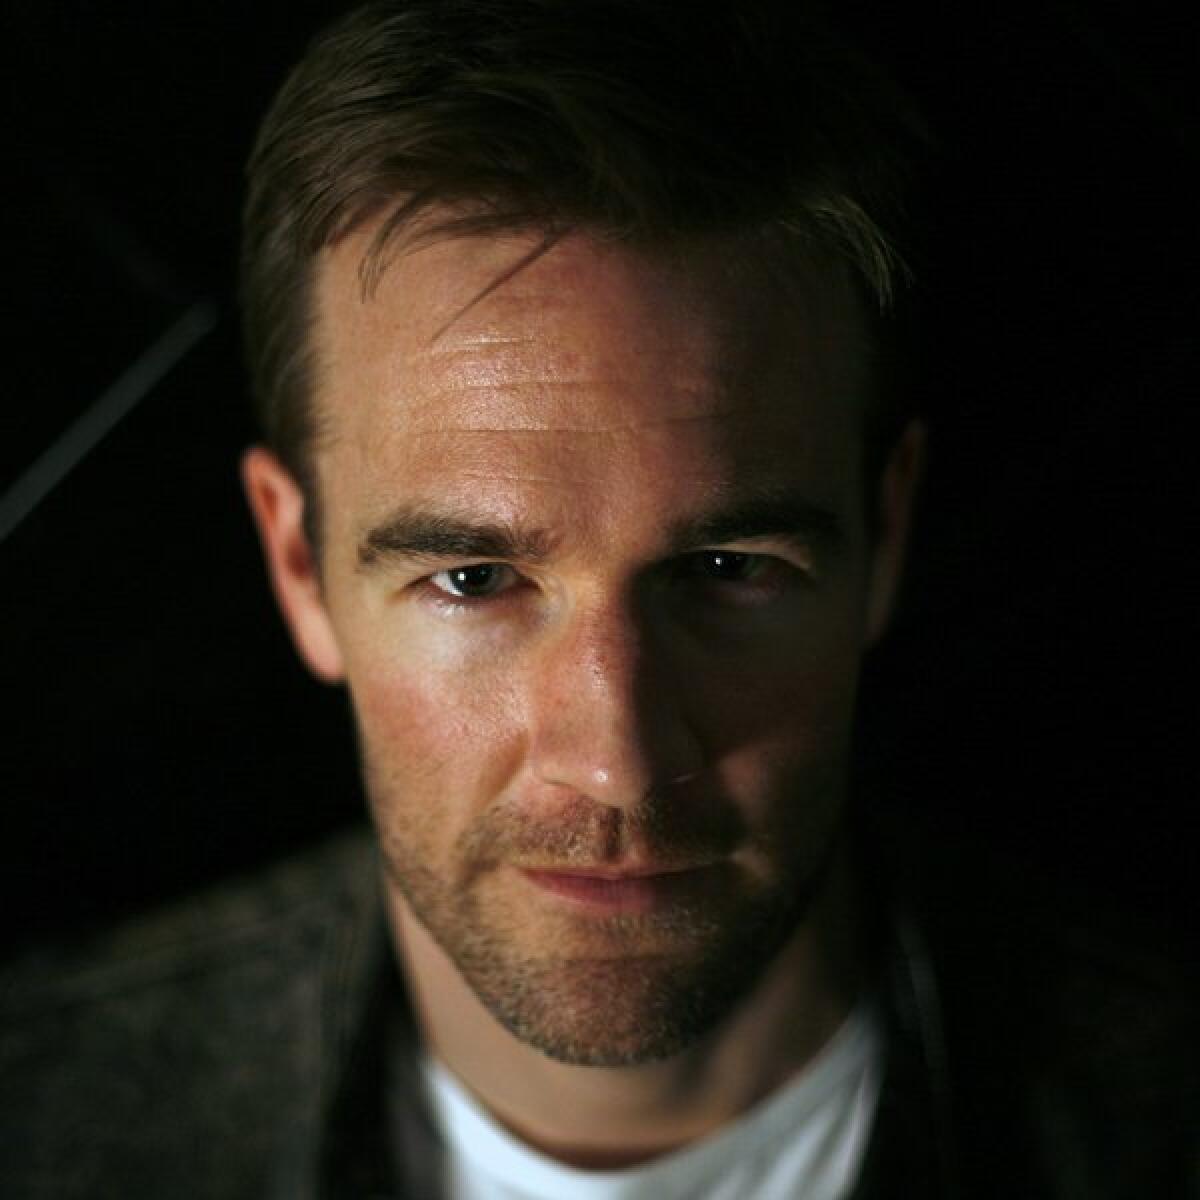 James Van Der Beek and his wife, Kimberly, are expecting their third baby.